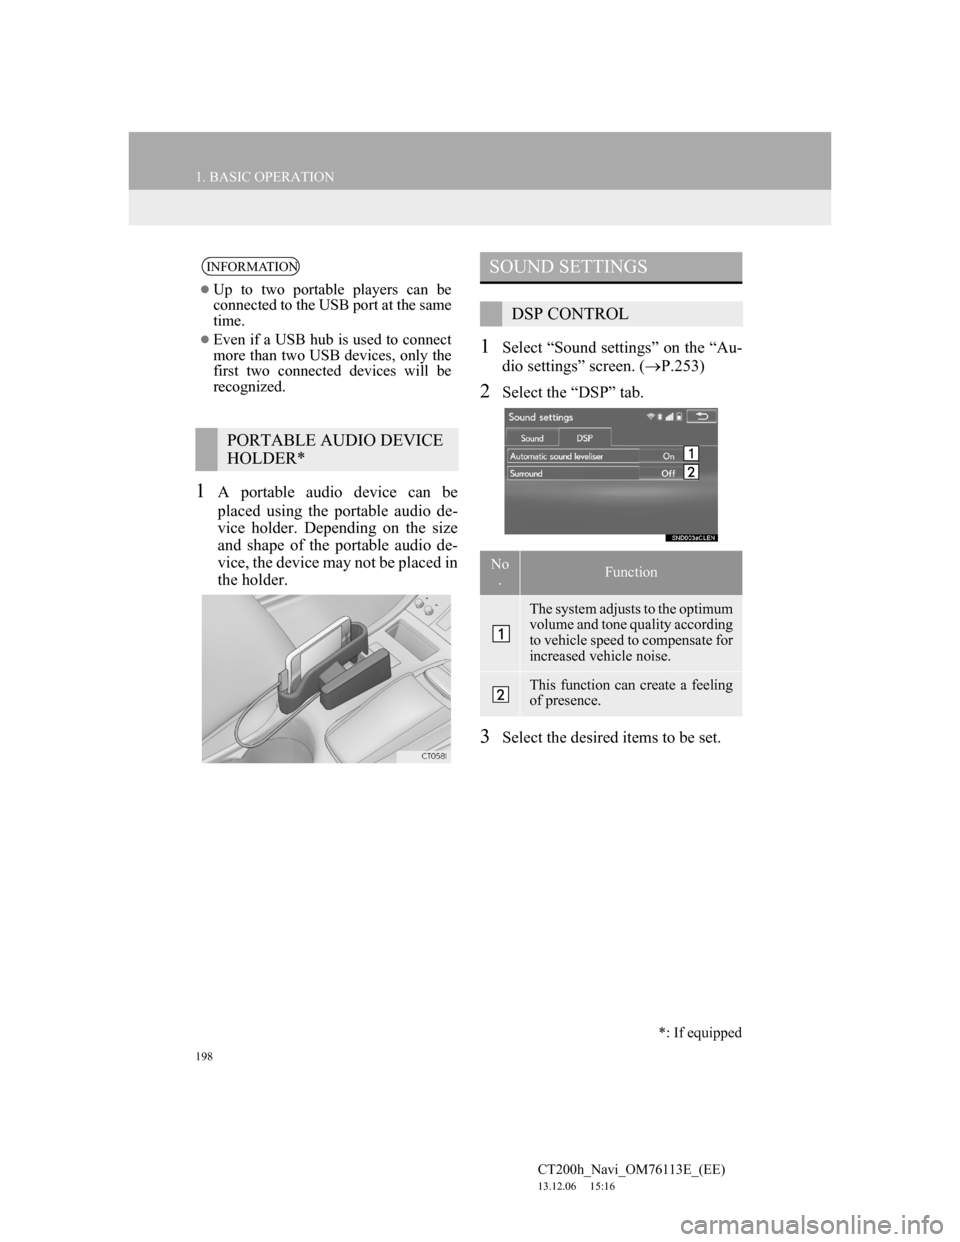 Lexus CT200h 2013  Navigation Manual (in English) 198
1. BASIC OPERATION
CT200h_Navi_OM76113E_(EE)
13.12.06     15:16
1A portable audio device can be
placed using the portable audio de-
vice holder. Depending on the size
and shape of the portable aud